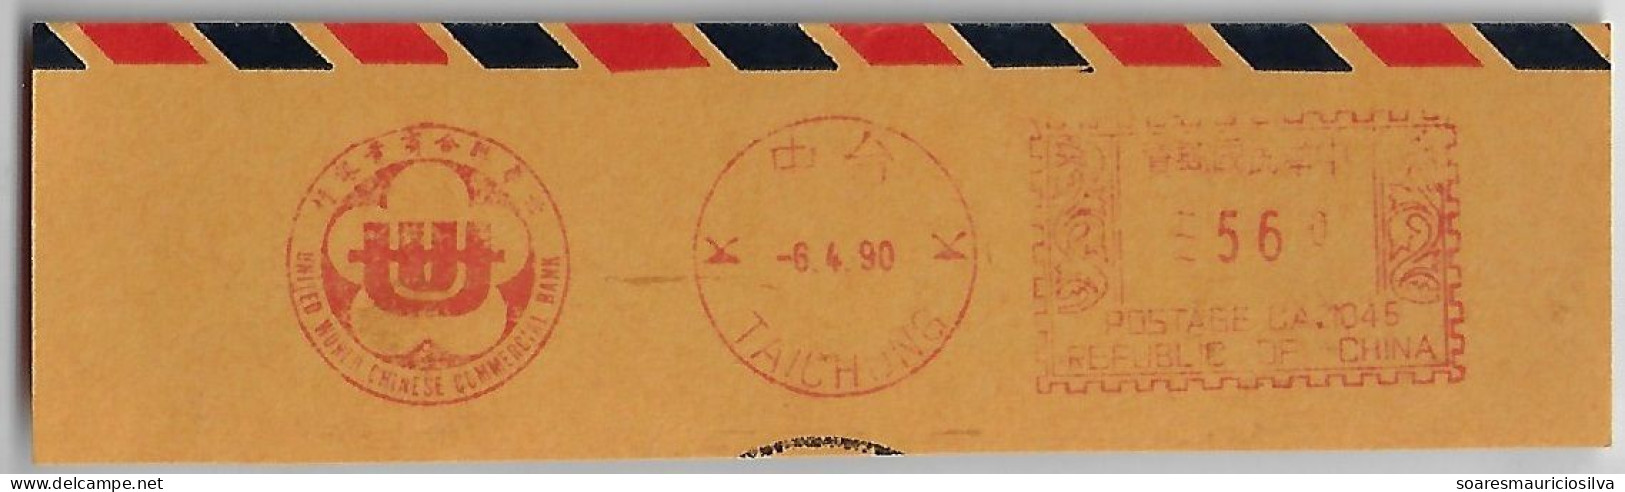 Taiwan 1990 Fragment Meter Stamp Pitney Bowes Slogan United World Chinese Commercial Bank Taichung Flower Plum Blossom - Covers & Documents